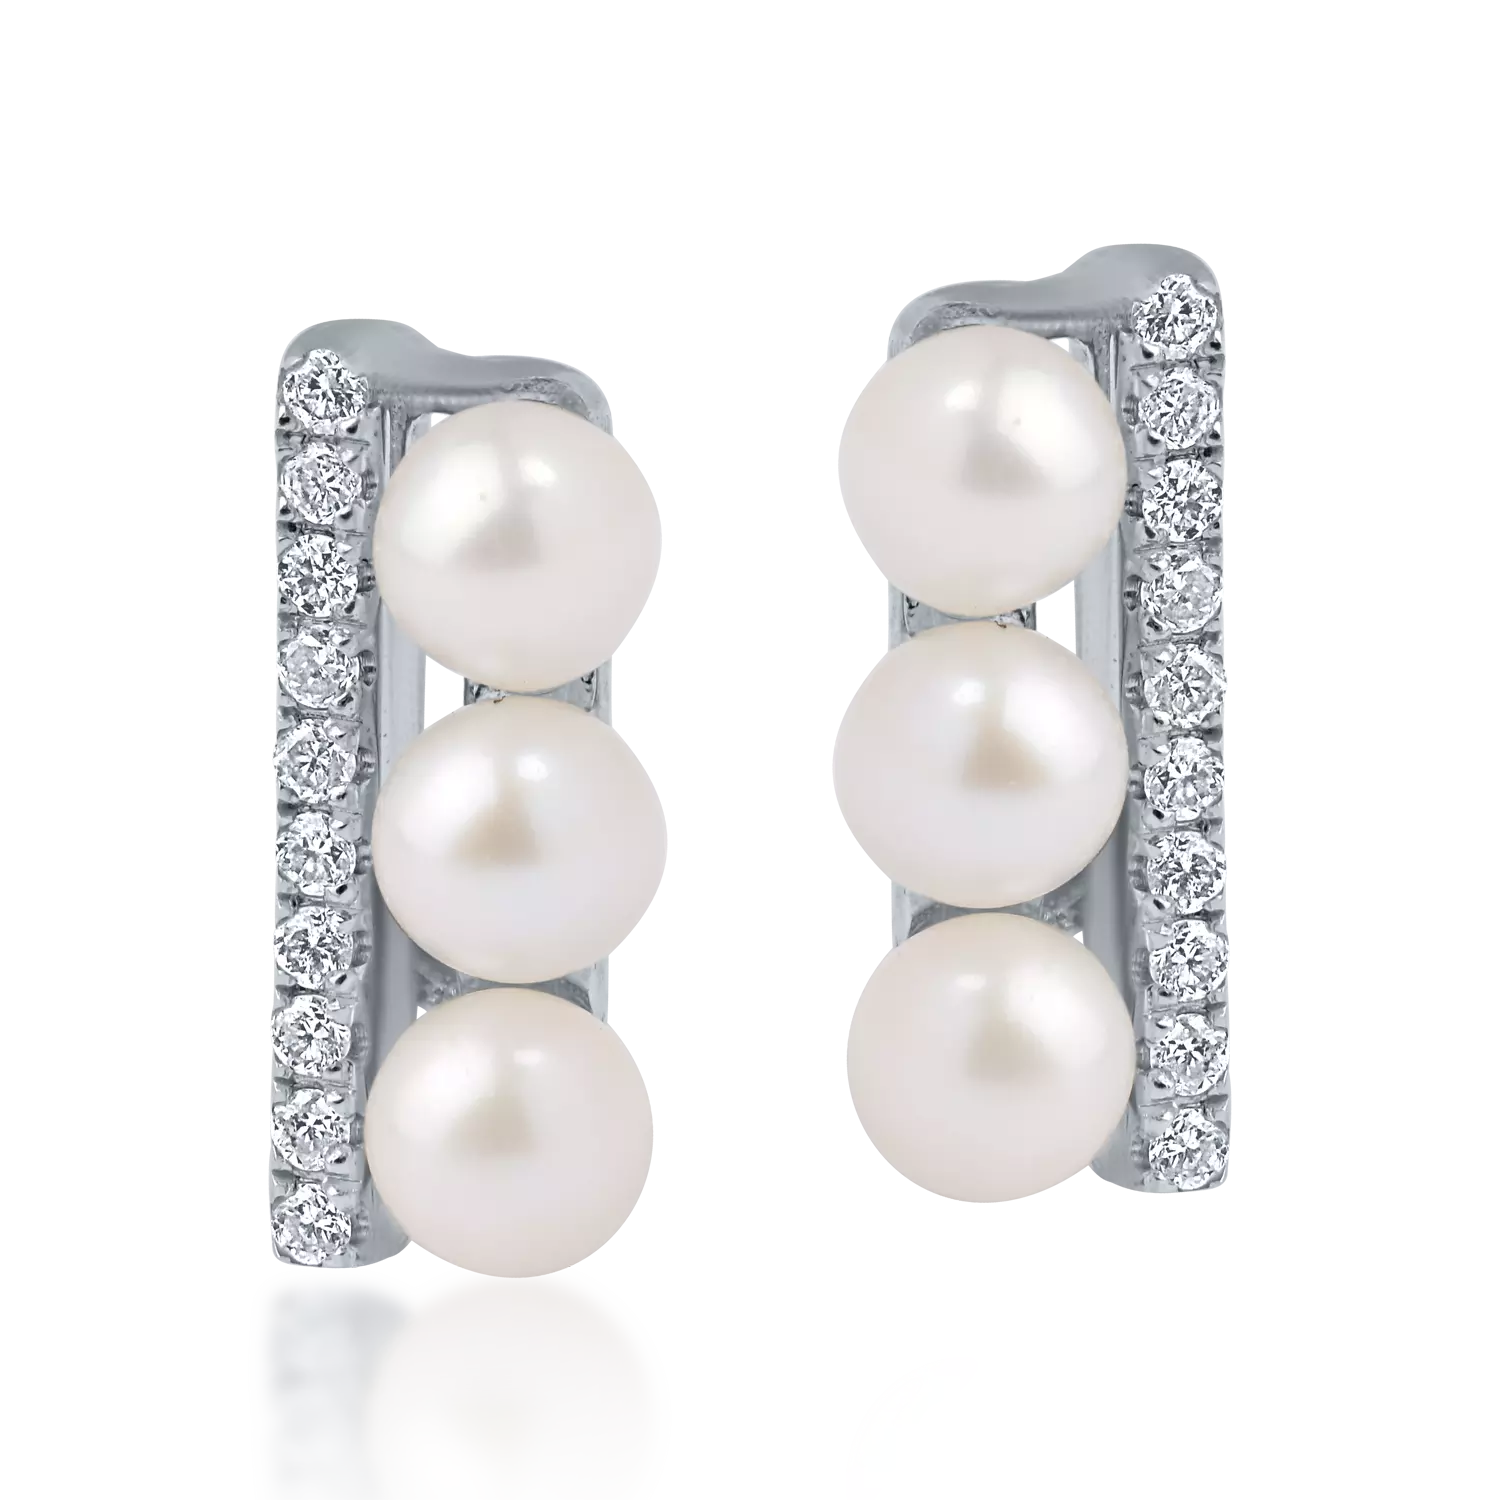 White gold earrings with 1.23ct fresh water pearls and 0.06ct diamonds